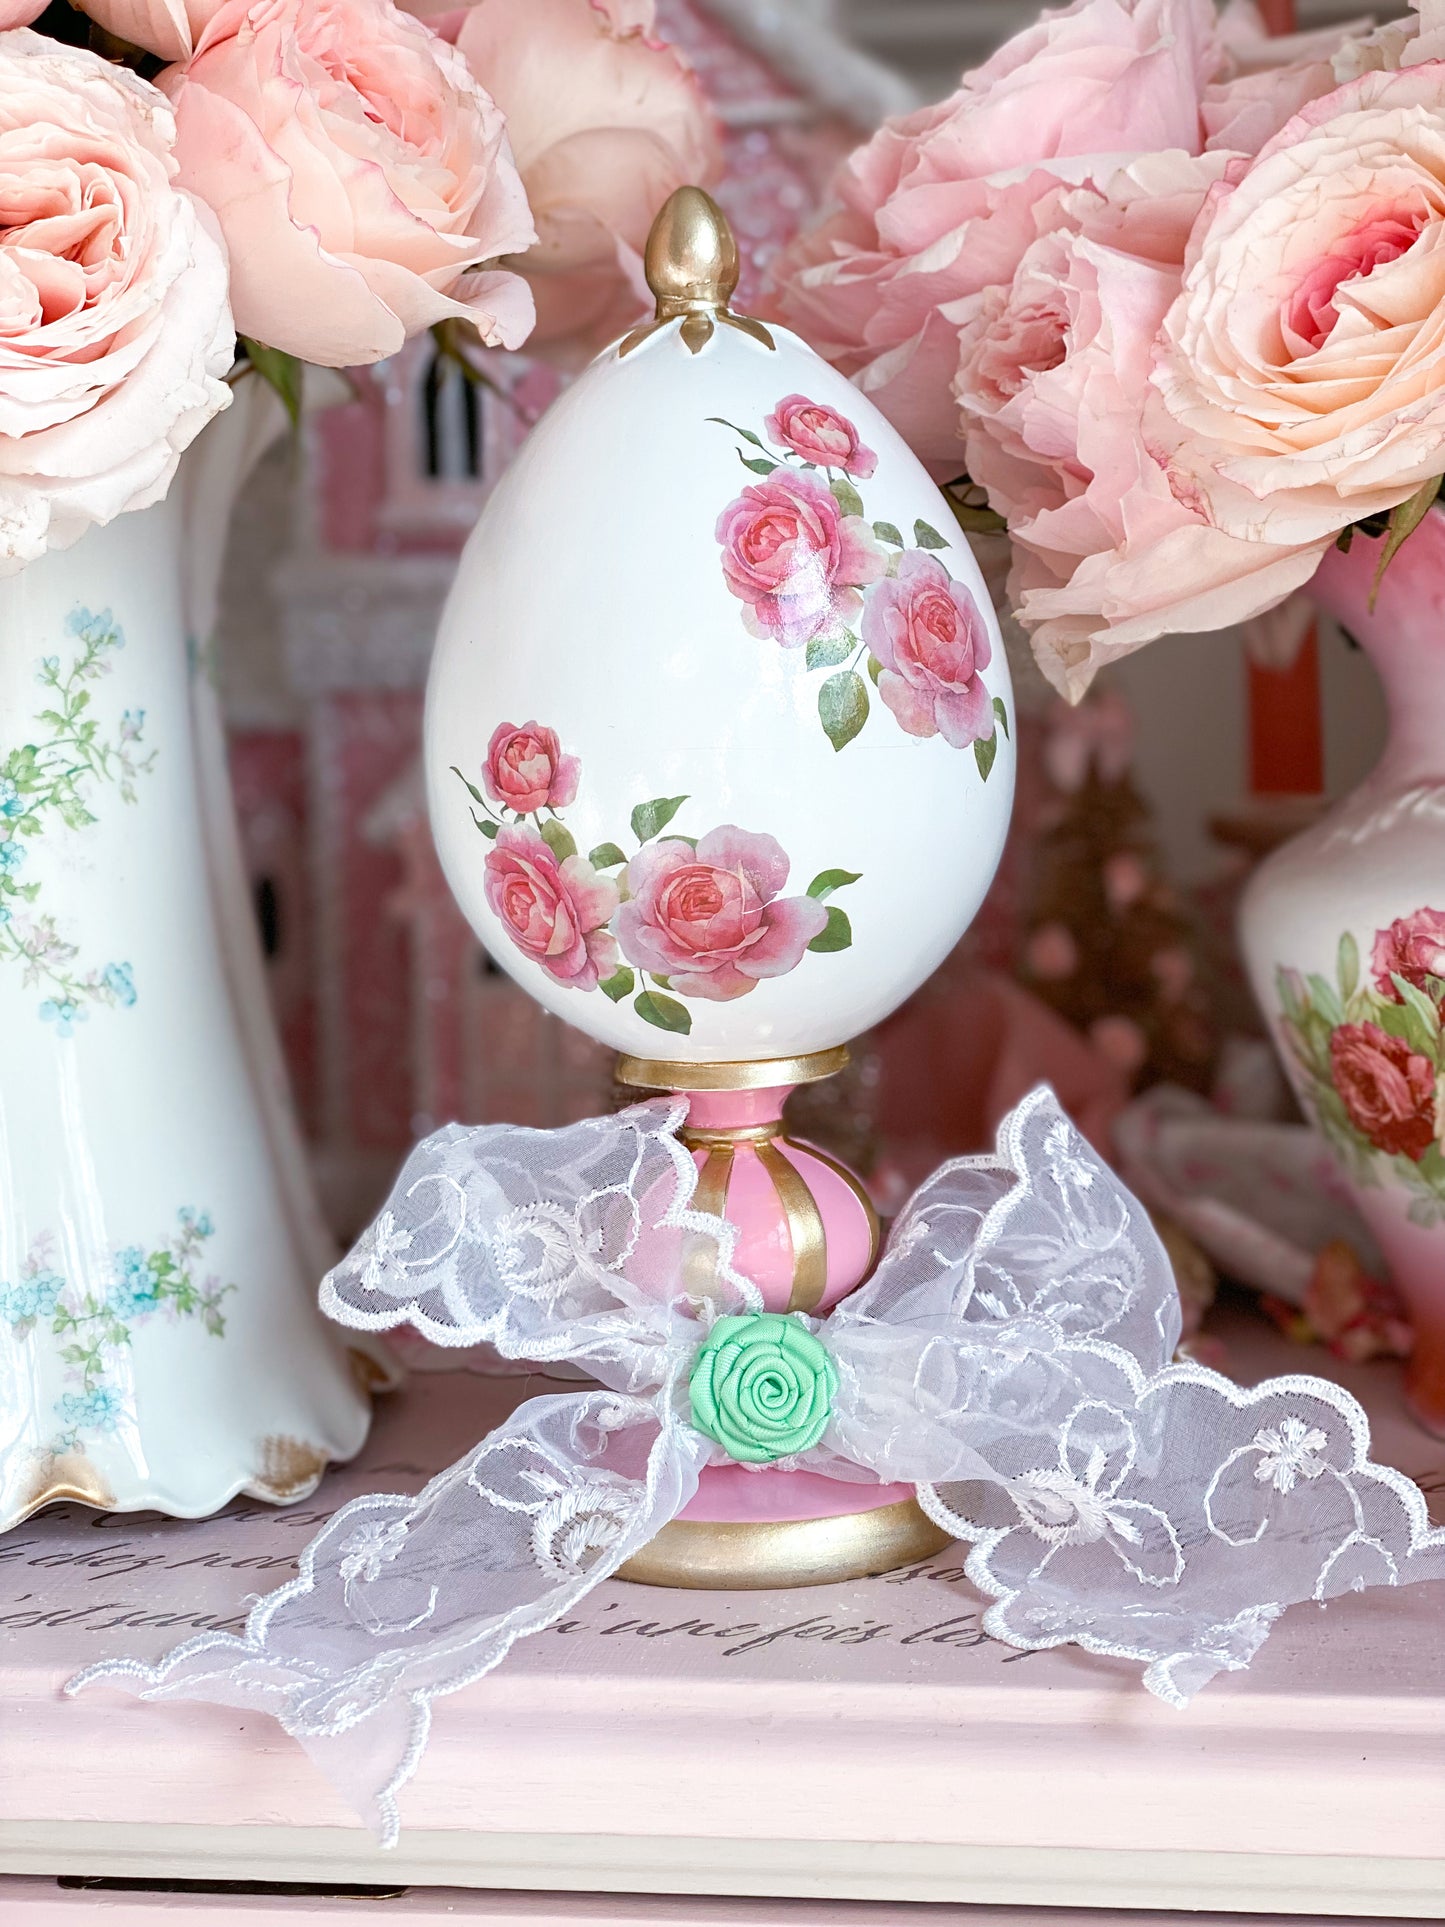 Bespoke Pastel Pink Shabby Chic Floral Easter Egg Finial Topiary